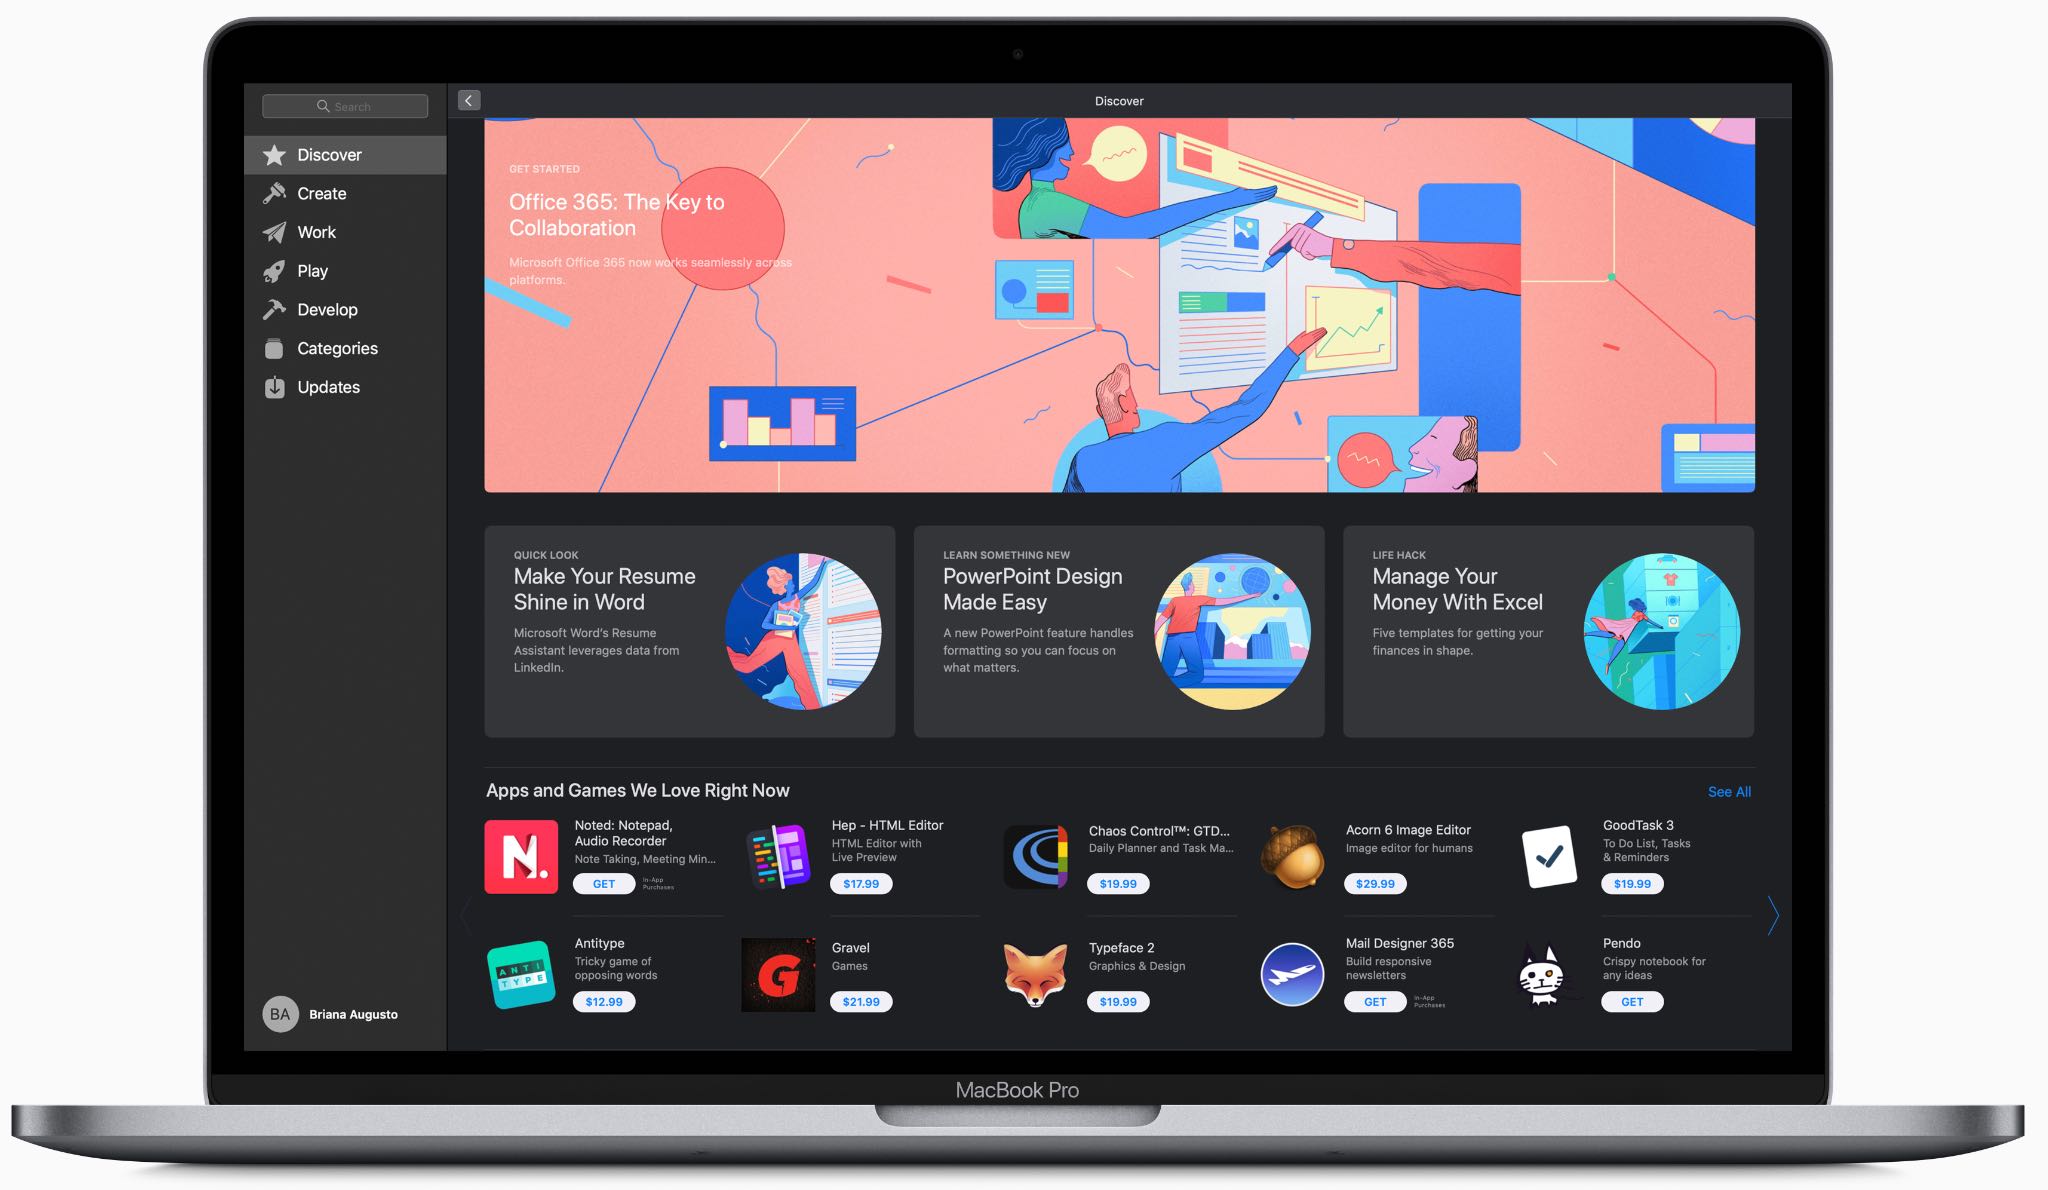 Microsoft Office 365 is now available on Mac App Store for the first time